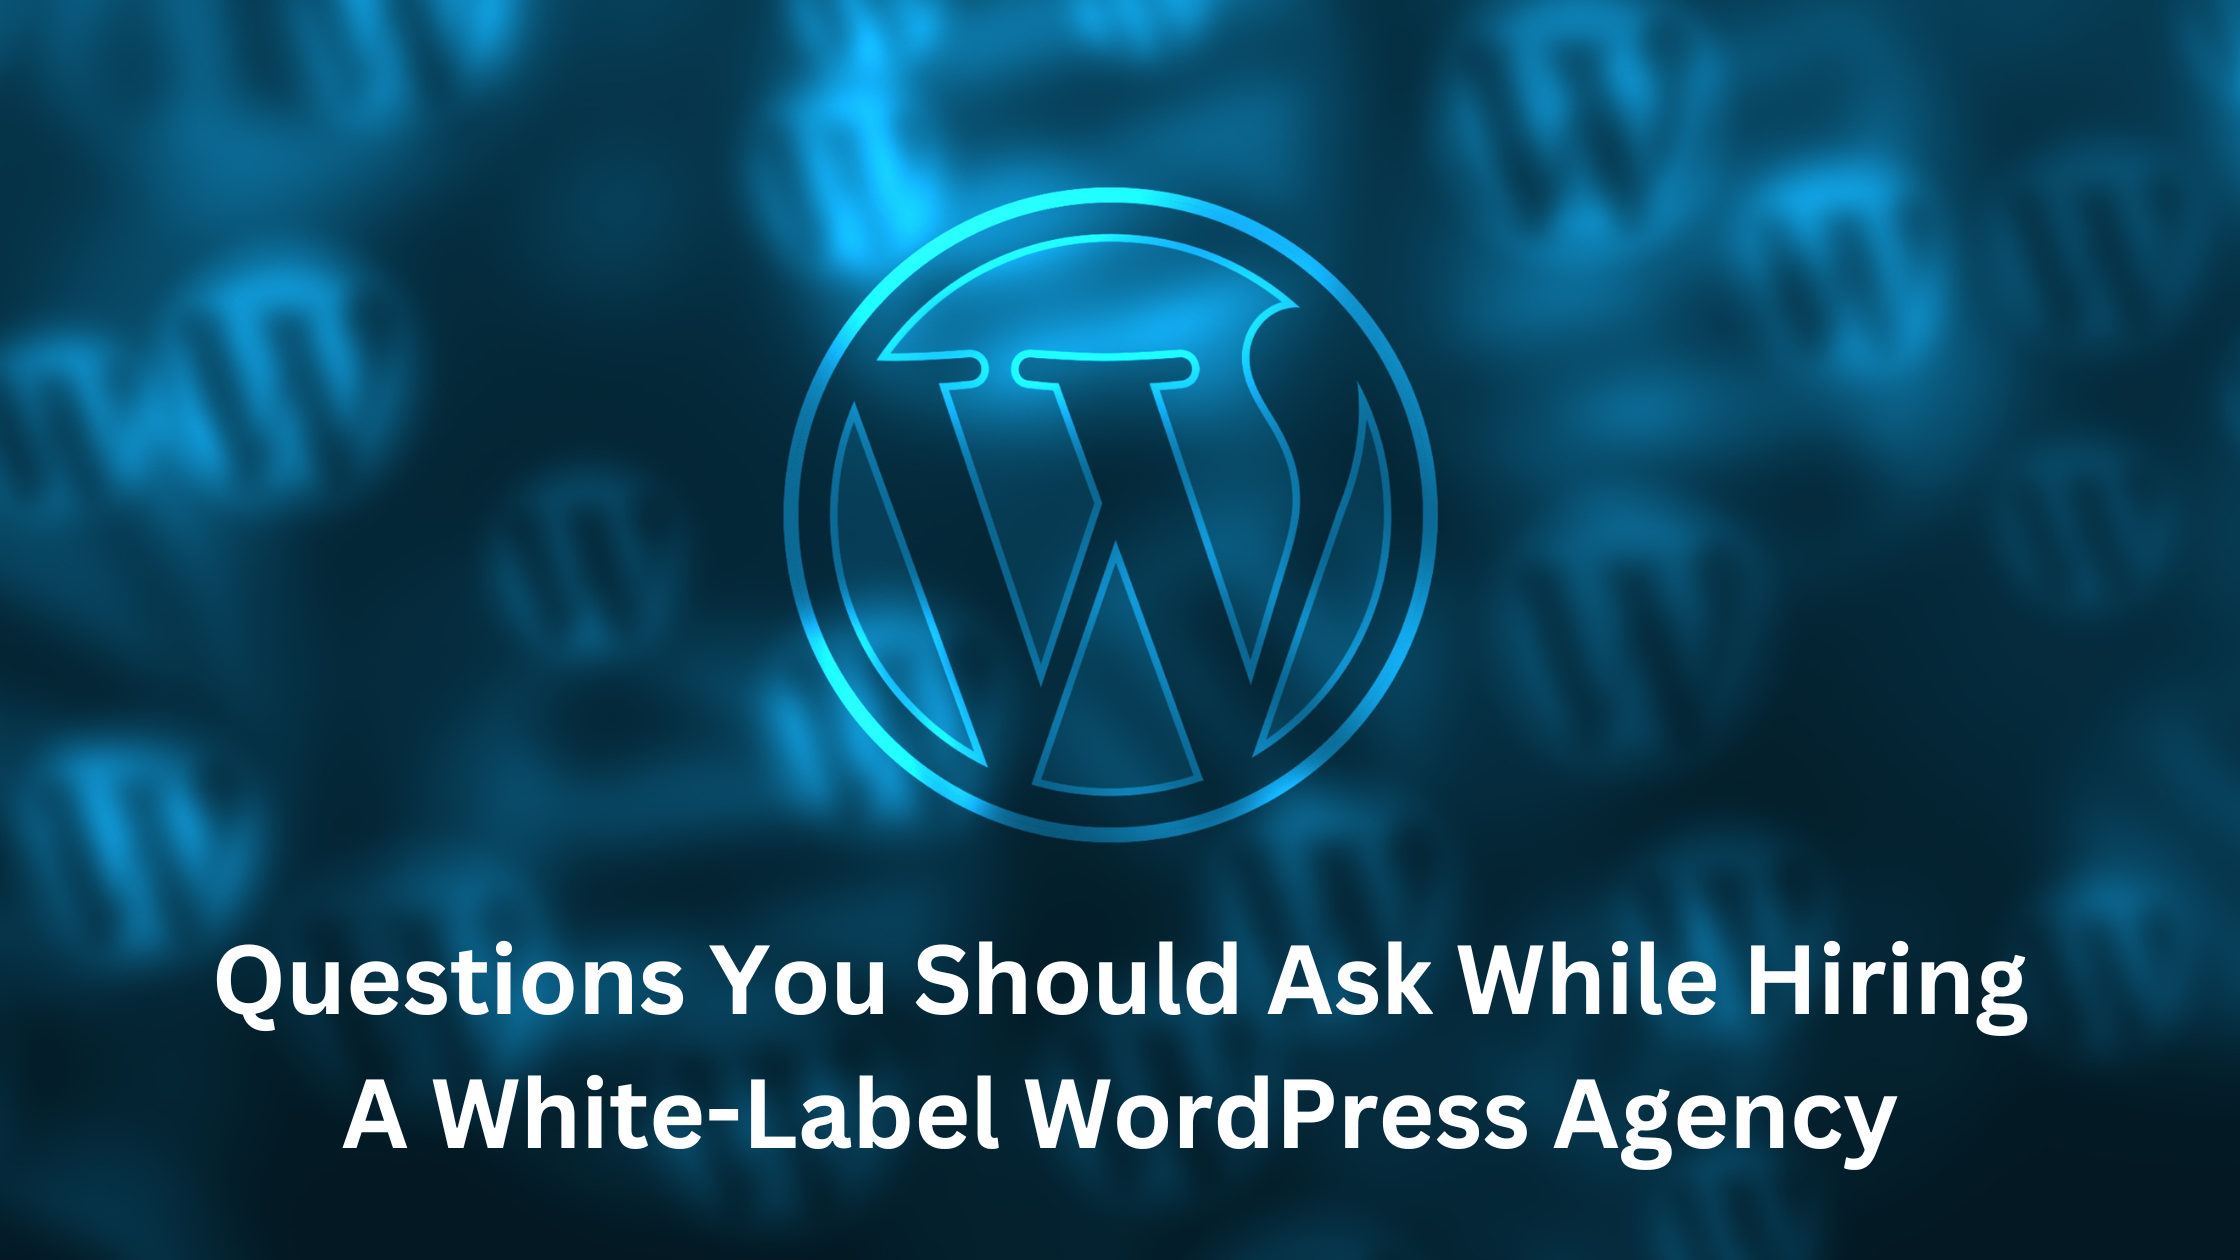 Questions You Should Ask While Hiring a White-Label WordPress Agency